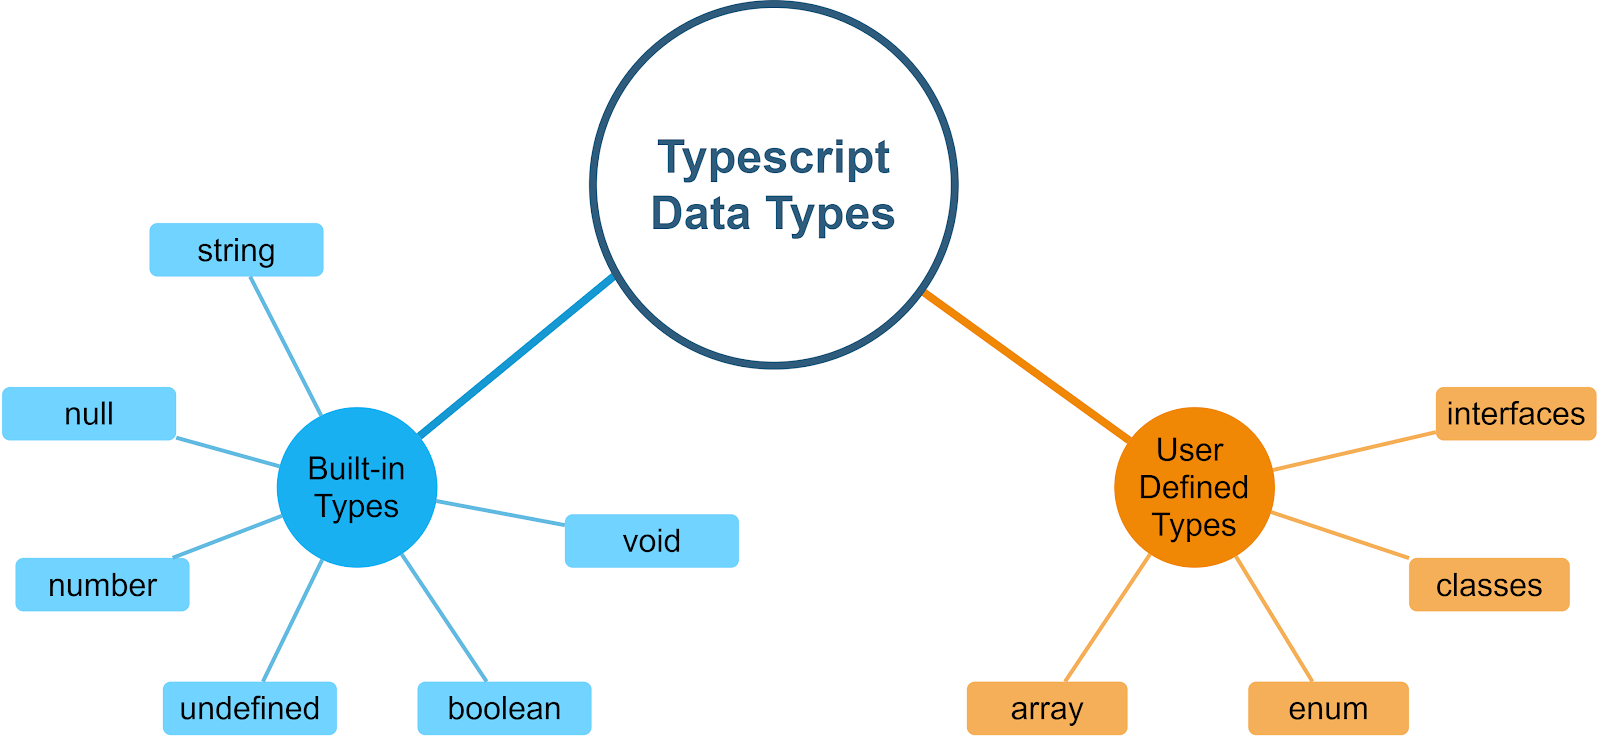 Built-in and user defined data types in Typescript